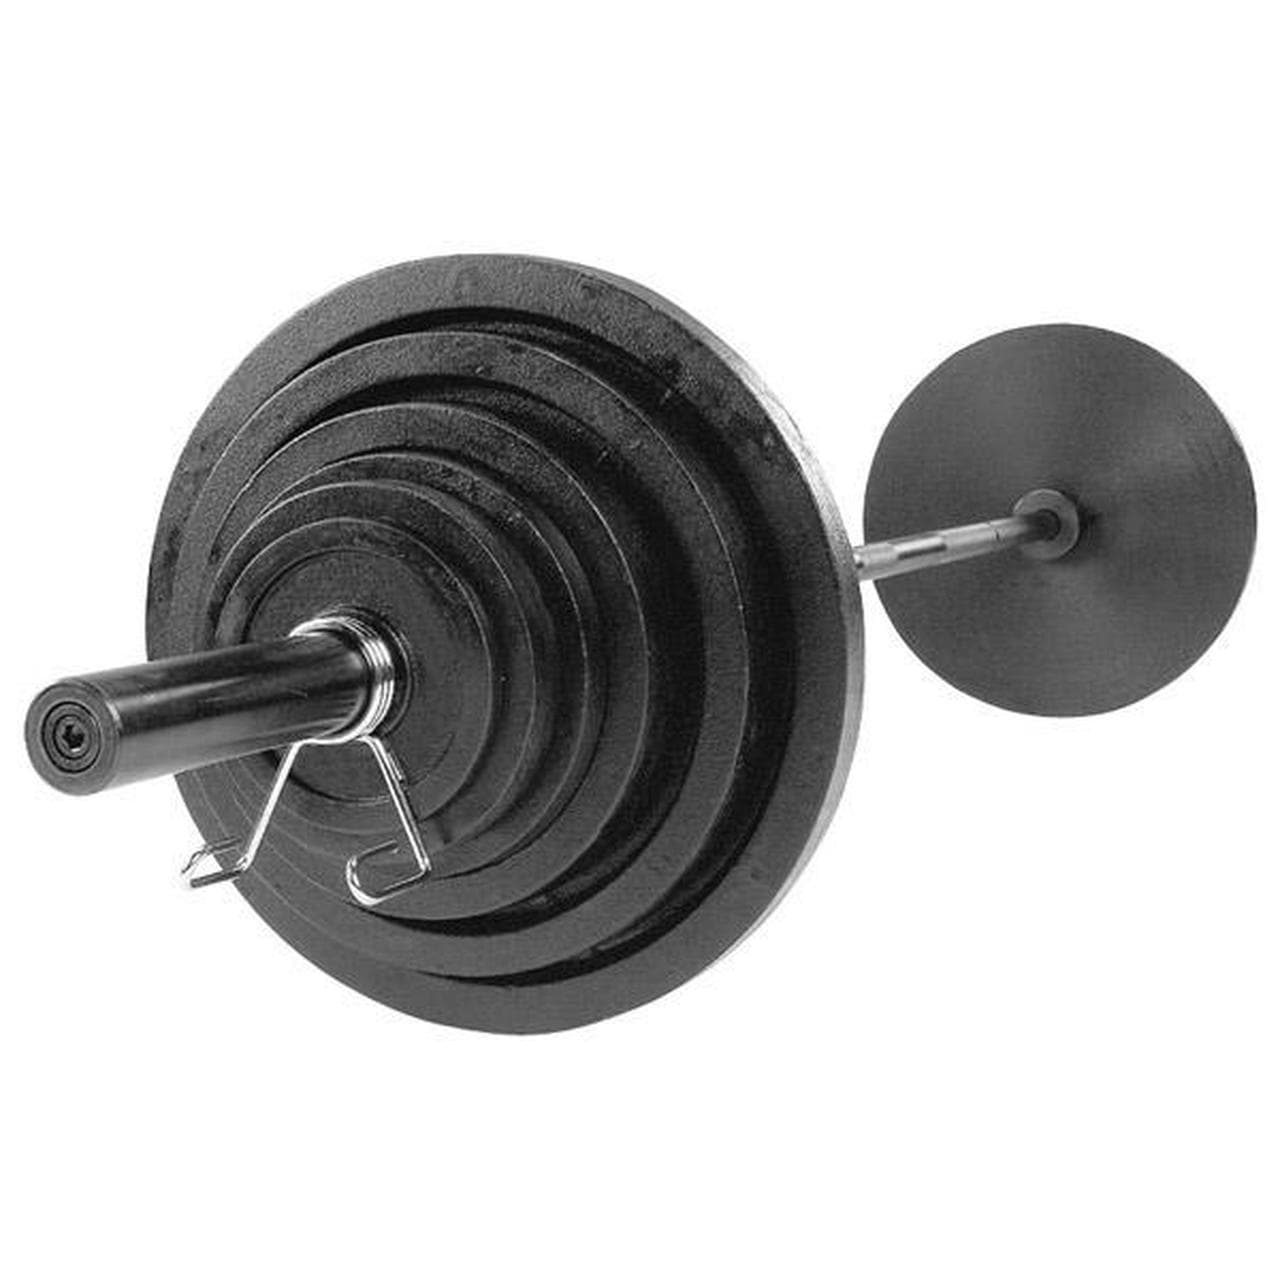 Body-Solid Cast Iron Olympic Weight Set with Bar plate Body-Solid Iron 